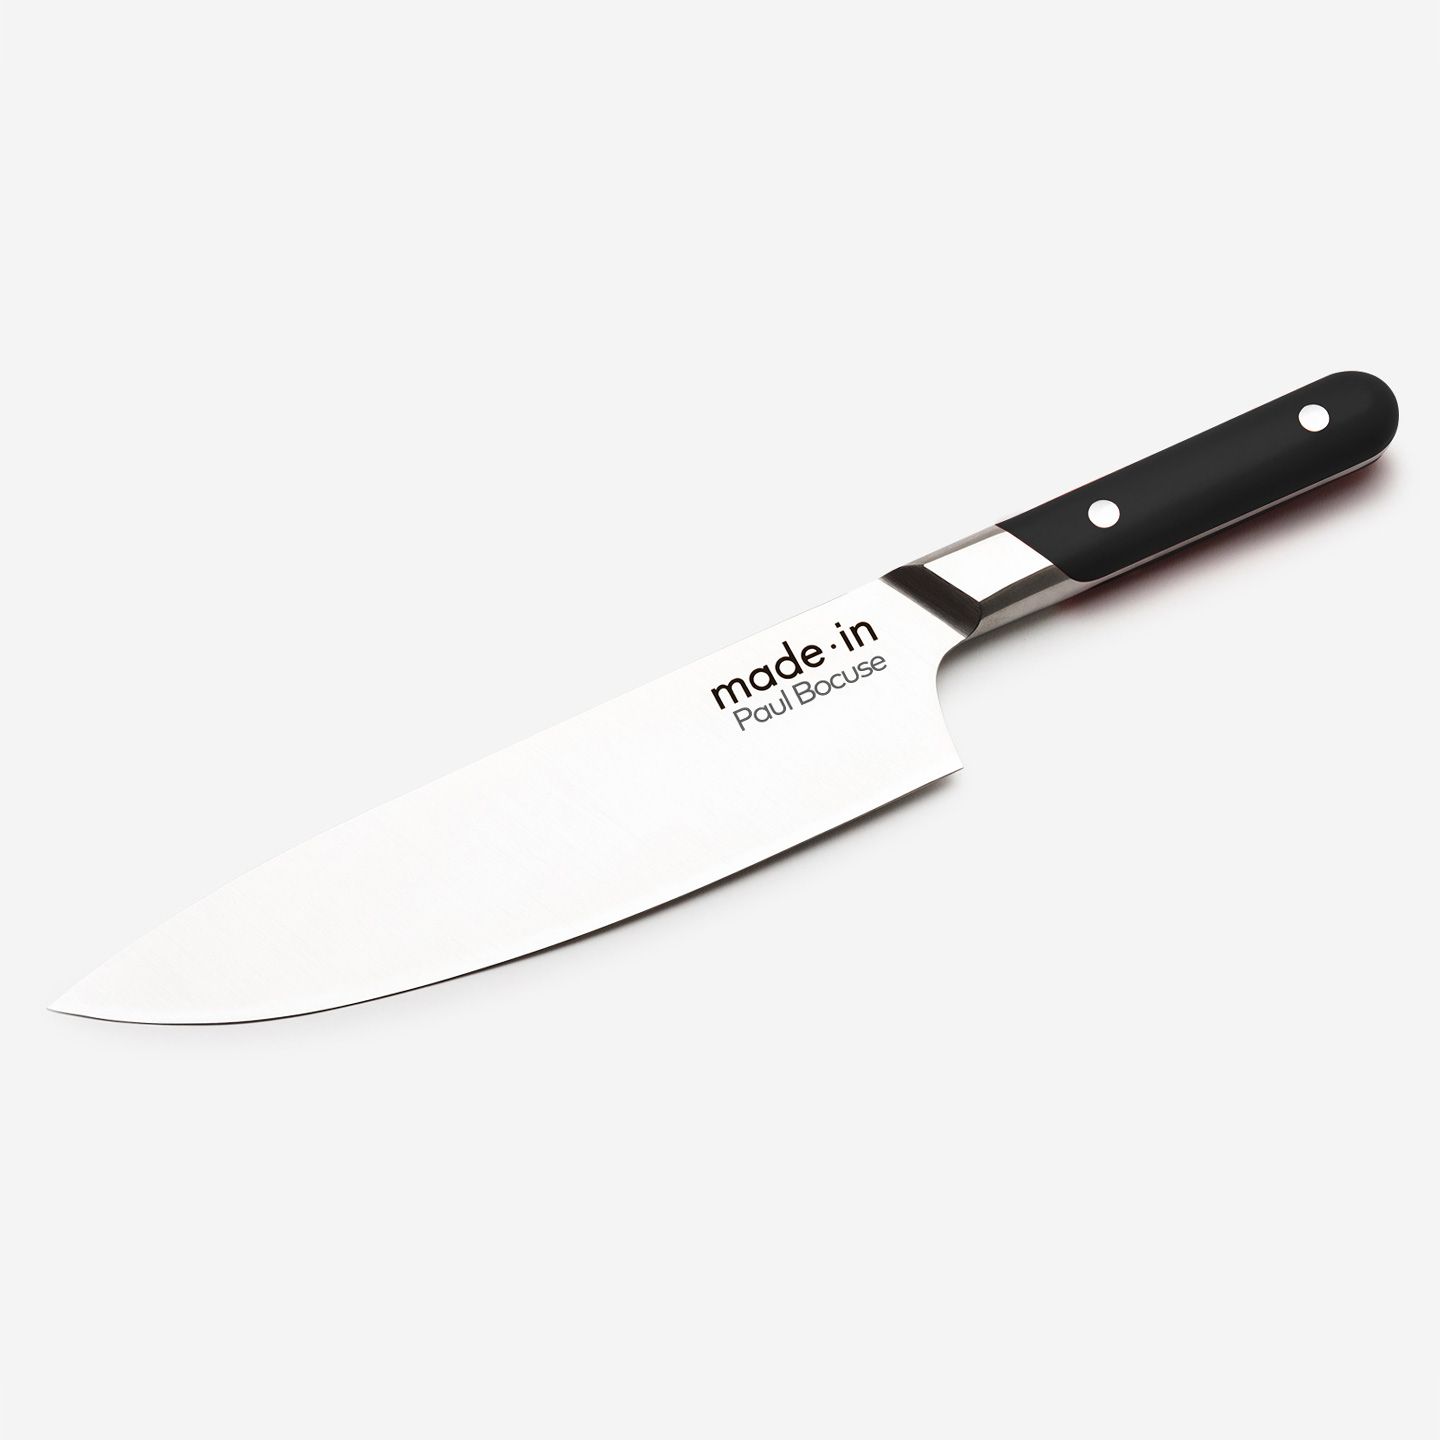  WÜSTHOF Classic 8 Inch Chef's Knife,Black,8-Inch: Chefs Knives:  Home & Kitchen